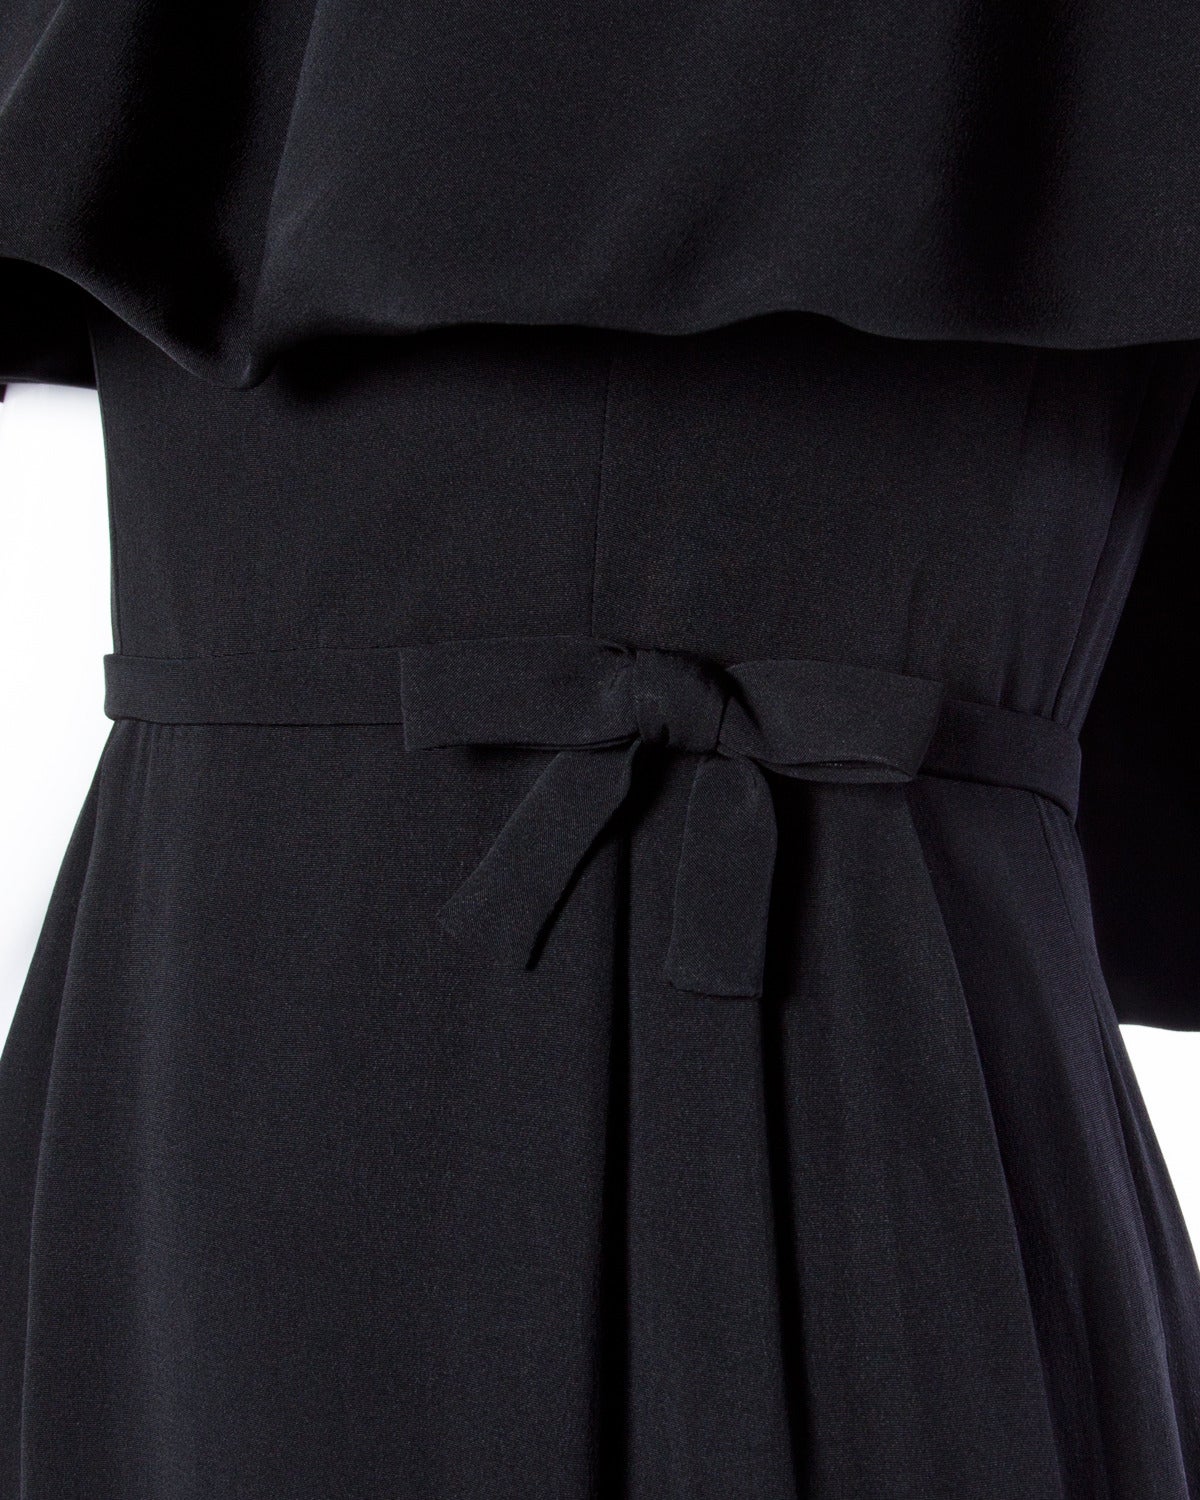 Nathan Strong Vintage 1960s 60s Black Silk Cocktail Dress with Capelet ...